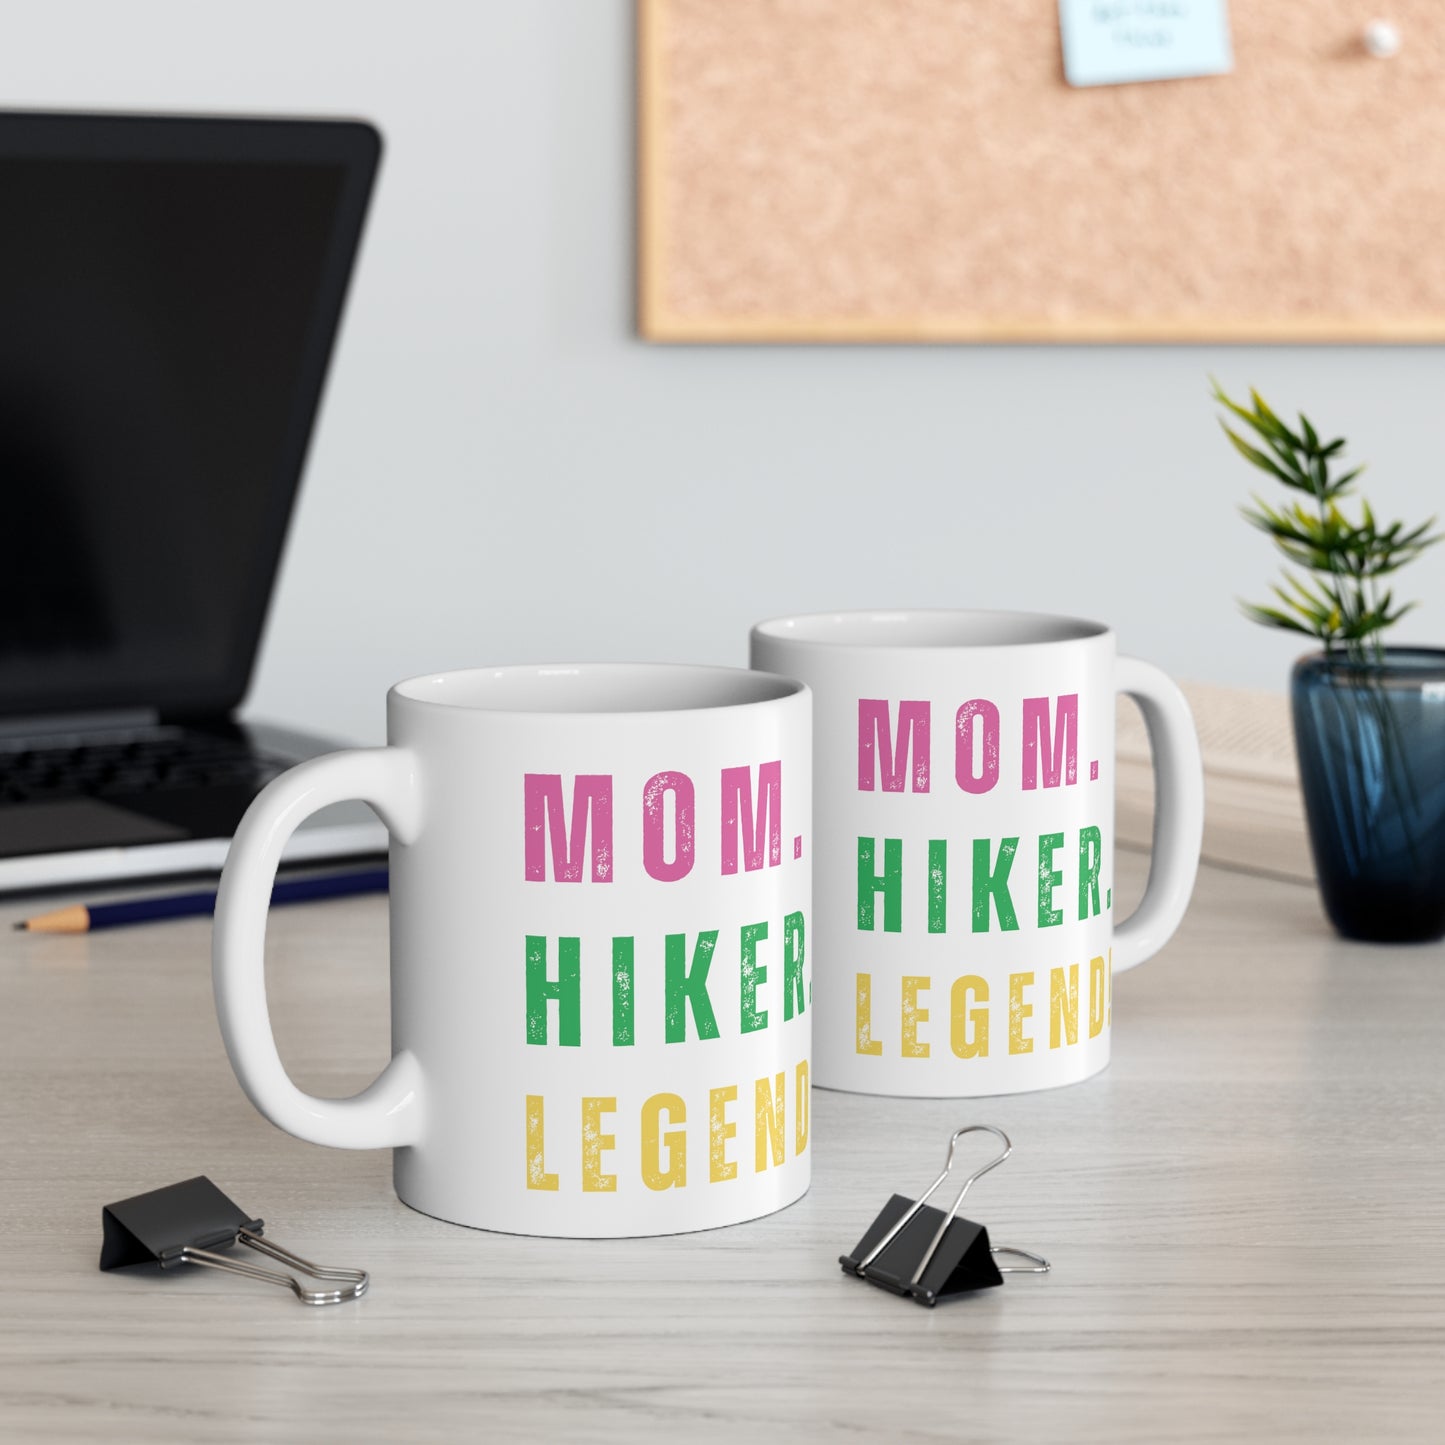 MOM. HIKER. LEGEND - Ceramic Mug 11oz - NOT SOLD IN STORES - Valentine's Day, Mother's Day, Birthday, ANY DAY!